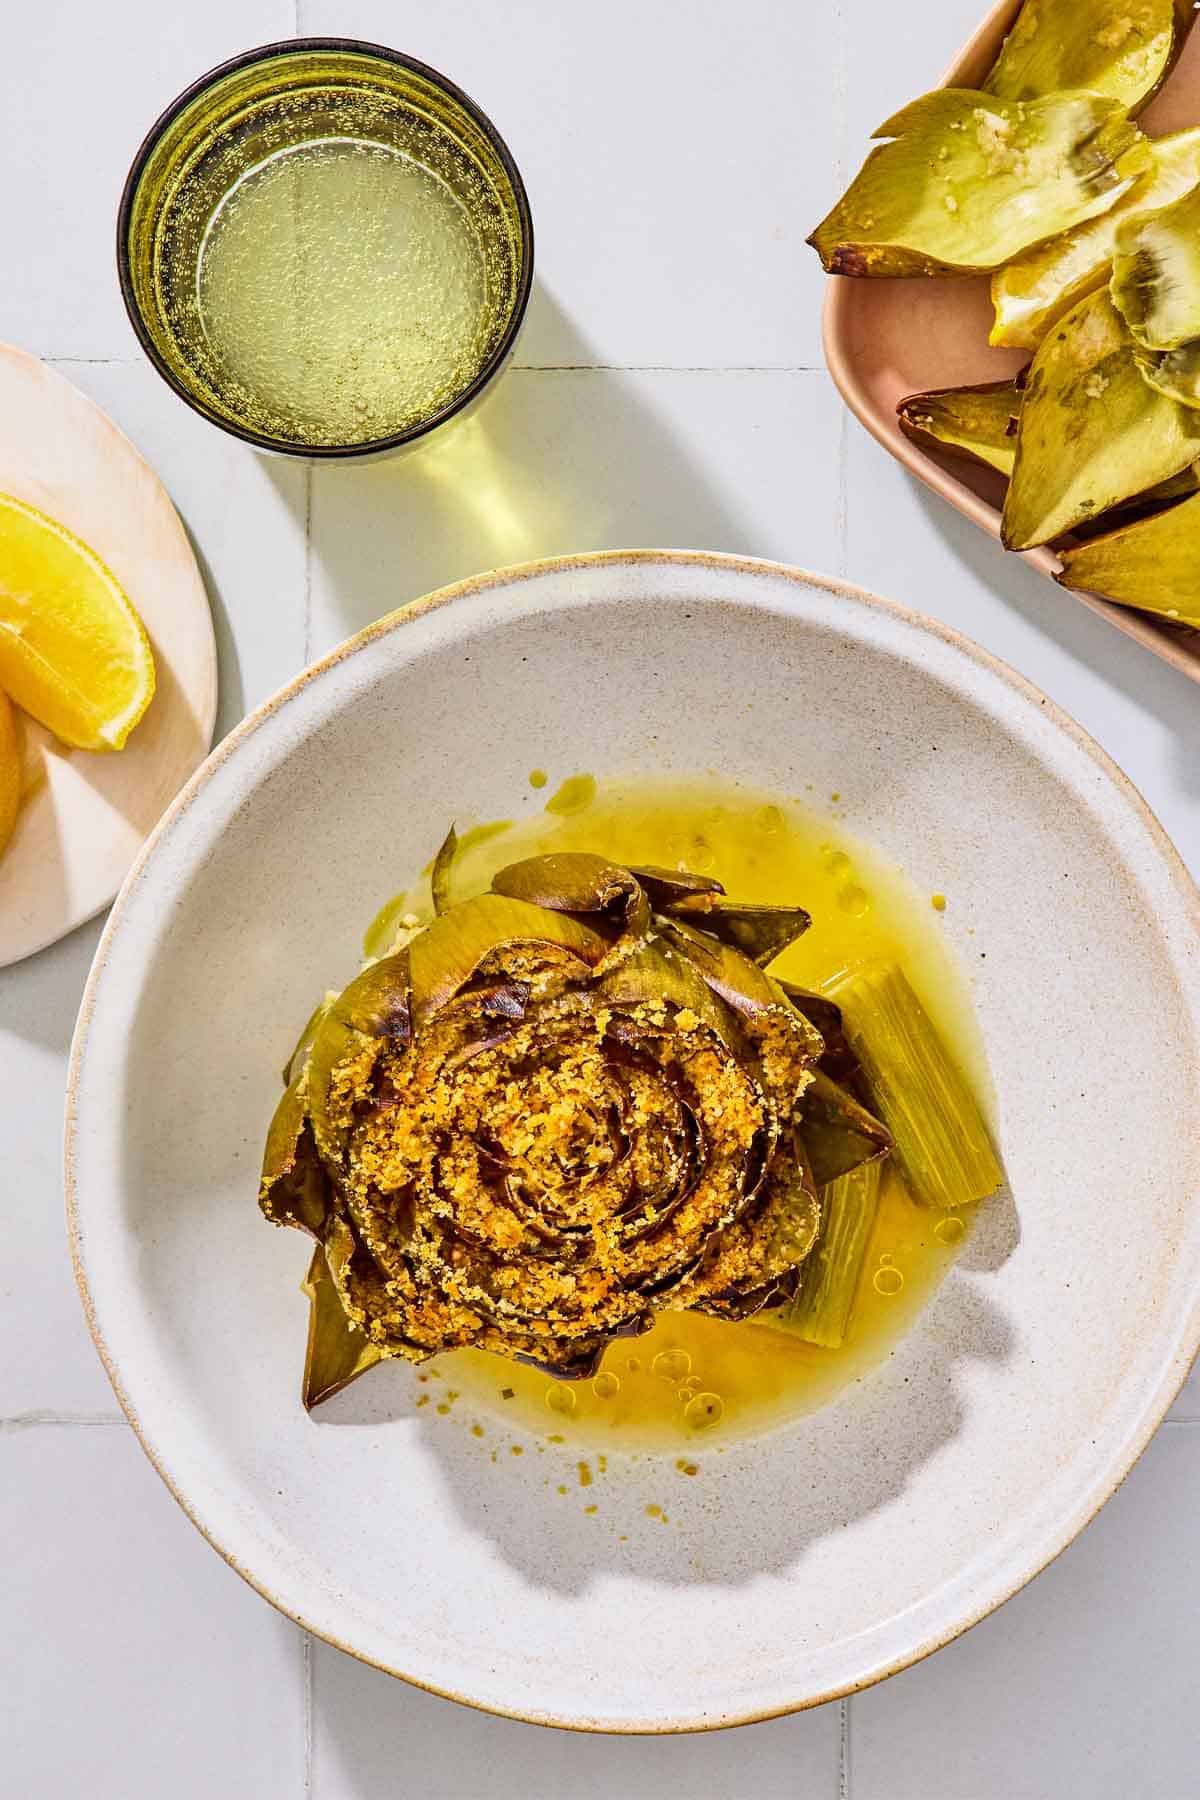 An overhead photo of a cooked stuffed artichoke in a bowl. Next to this is a plate of lemon wedges, a glass of water, and a tray of trimmed artichoke leaves.